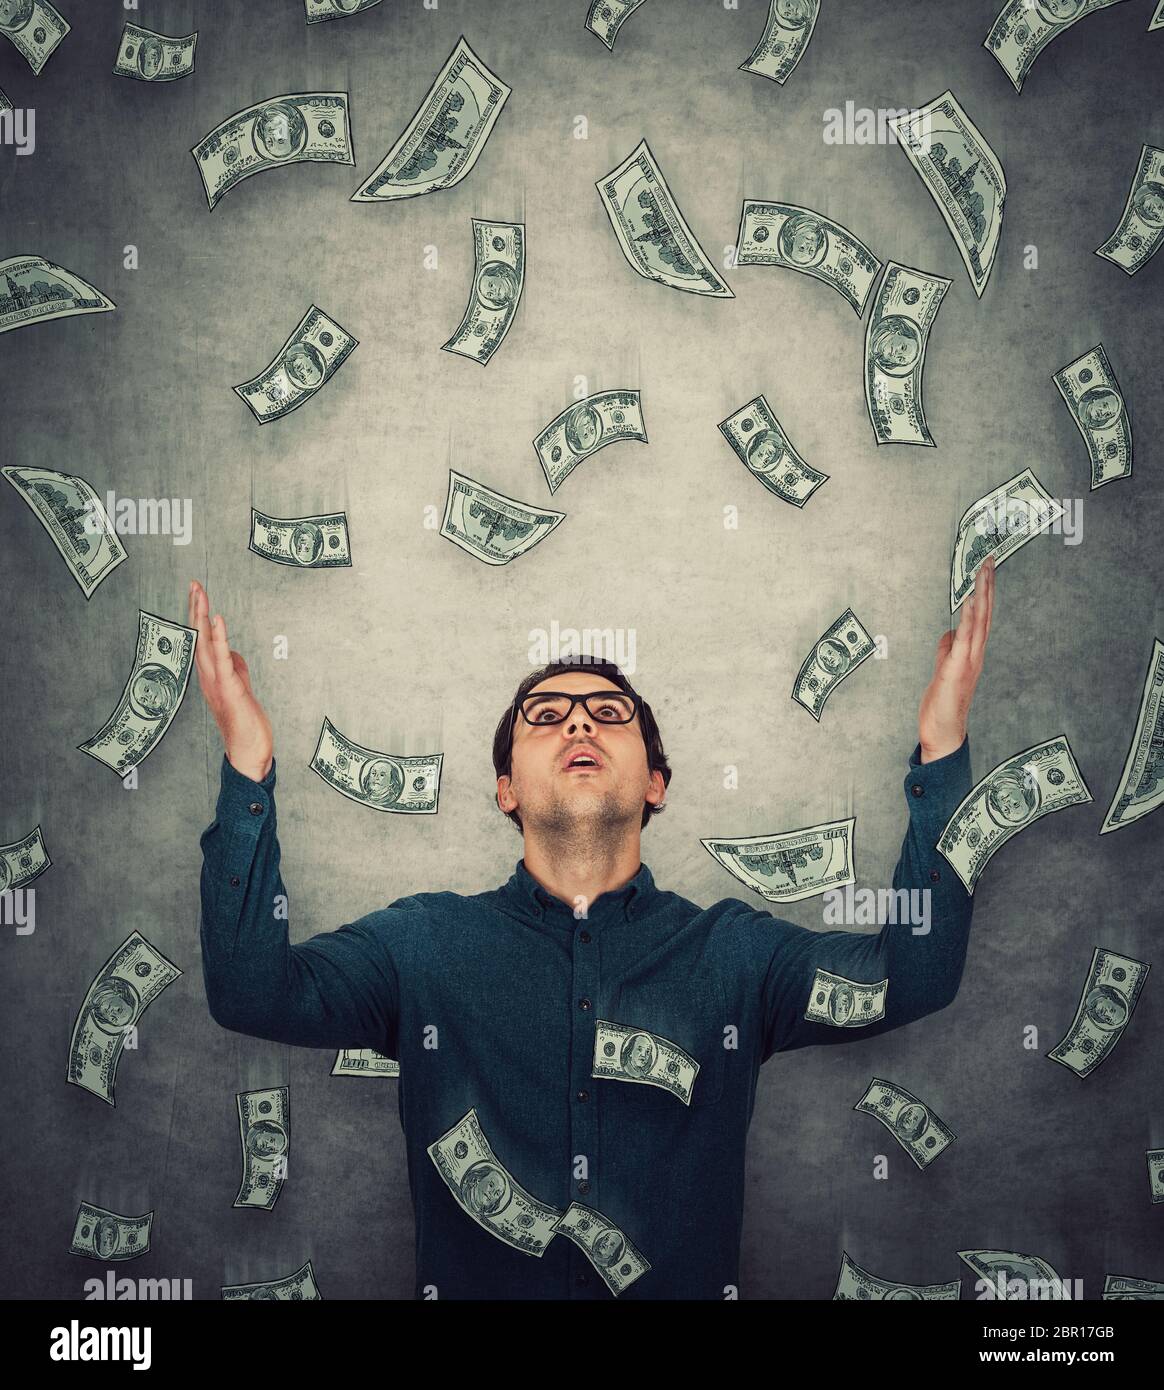 Astonished businessman raising up hands as money are falling like dollars rain. Surprised guy open mouth stunned expression, staring upwards. Lottery Stock Photo